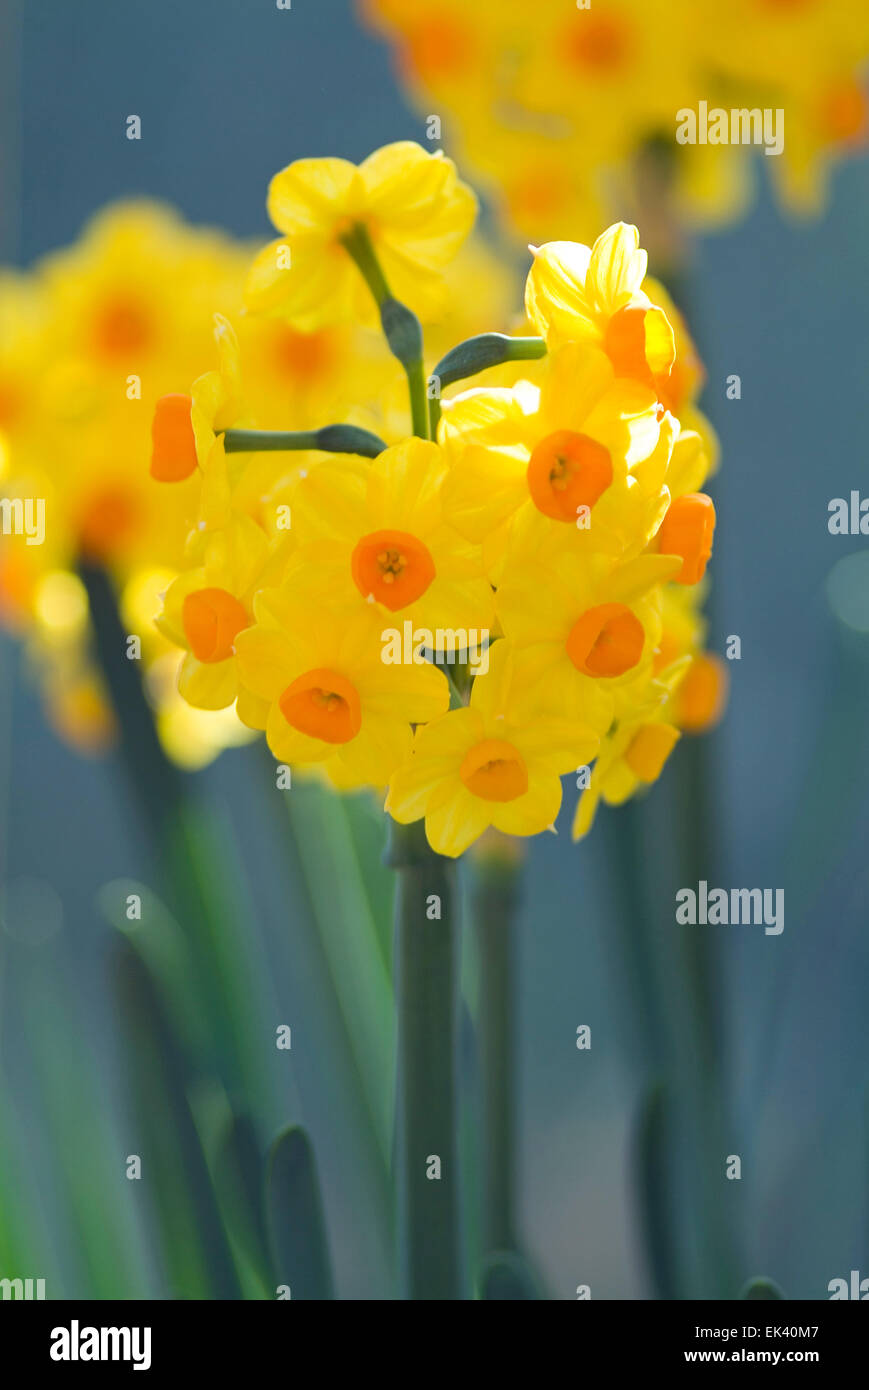 Narcissus in blossom Stock Photo